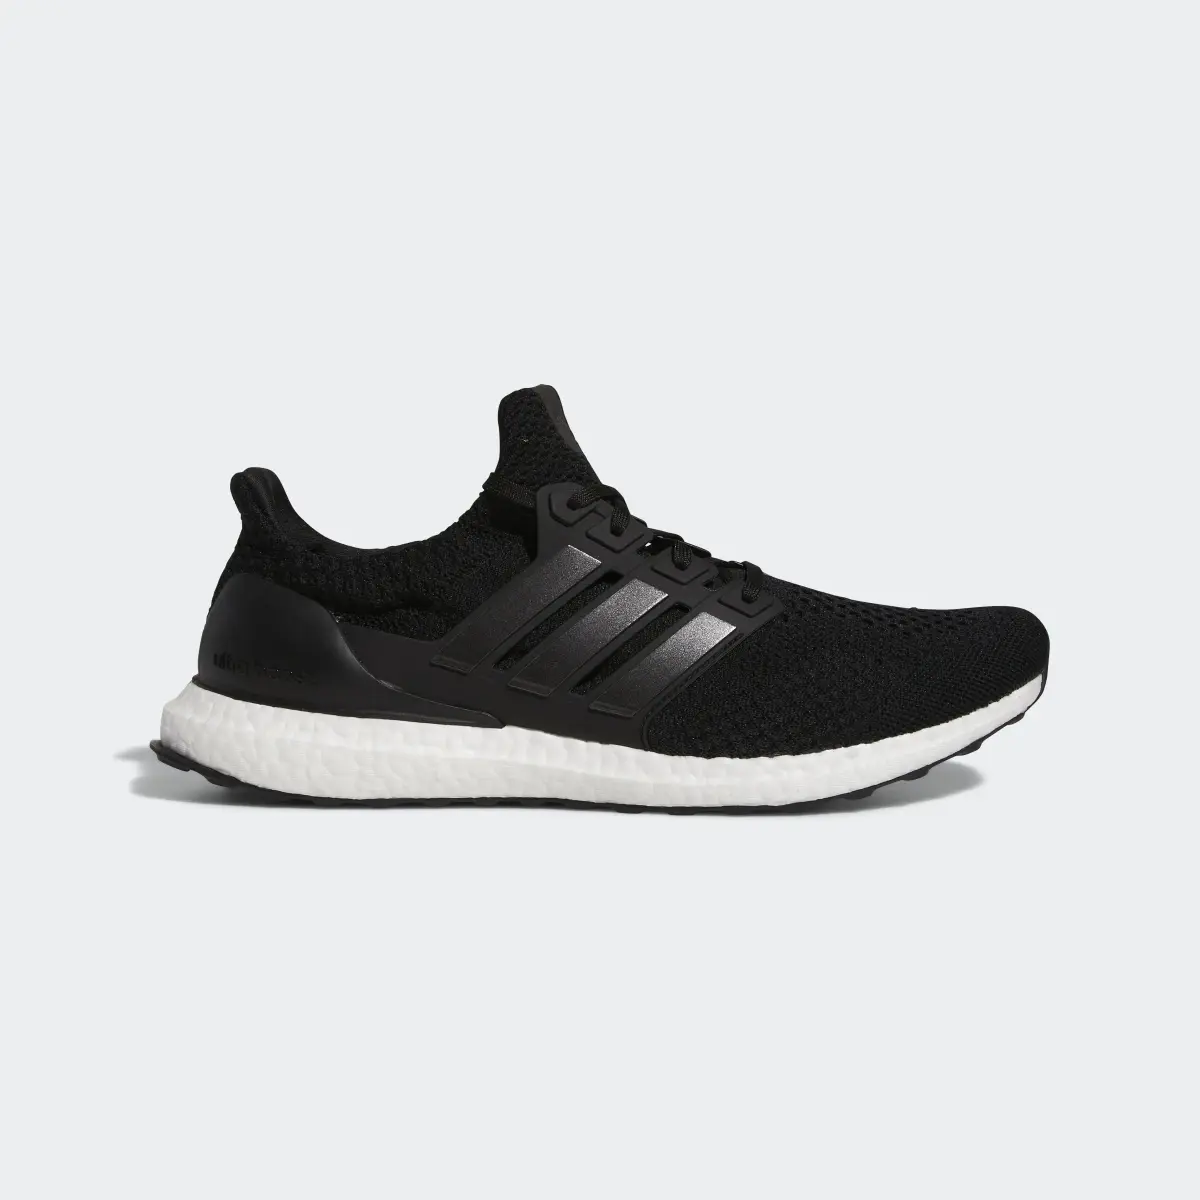 Adidas Ultraboost 5 DNA Running Lifestyle Shoes. 2